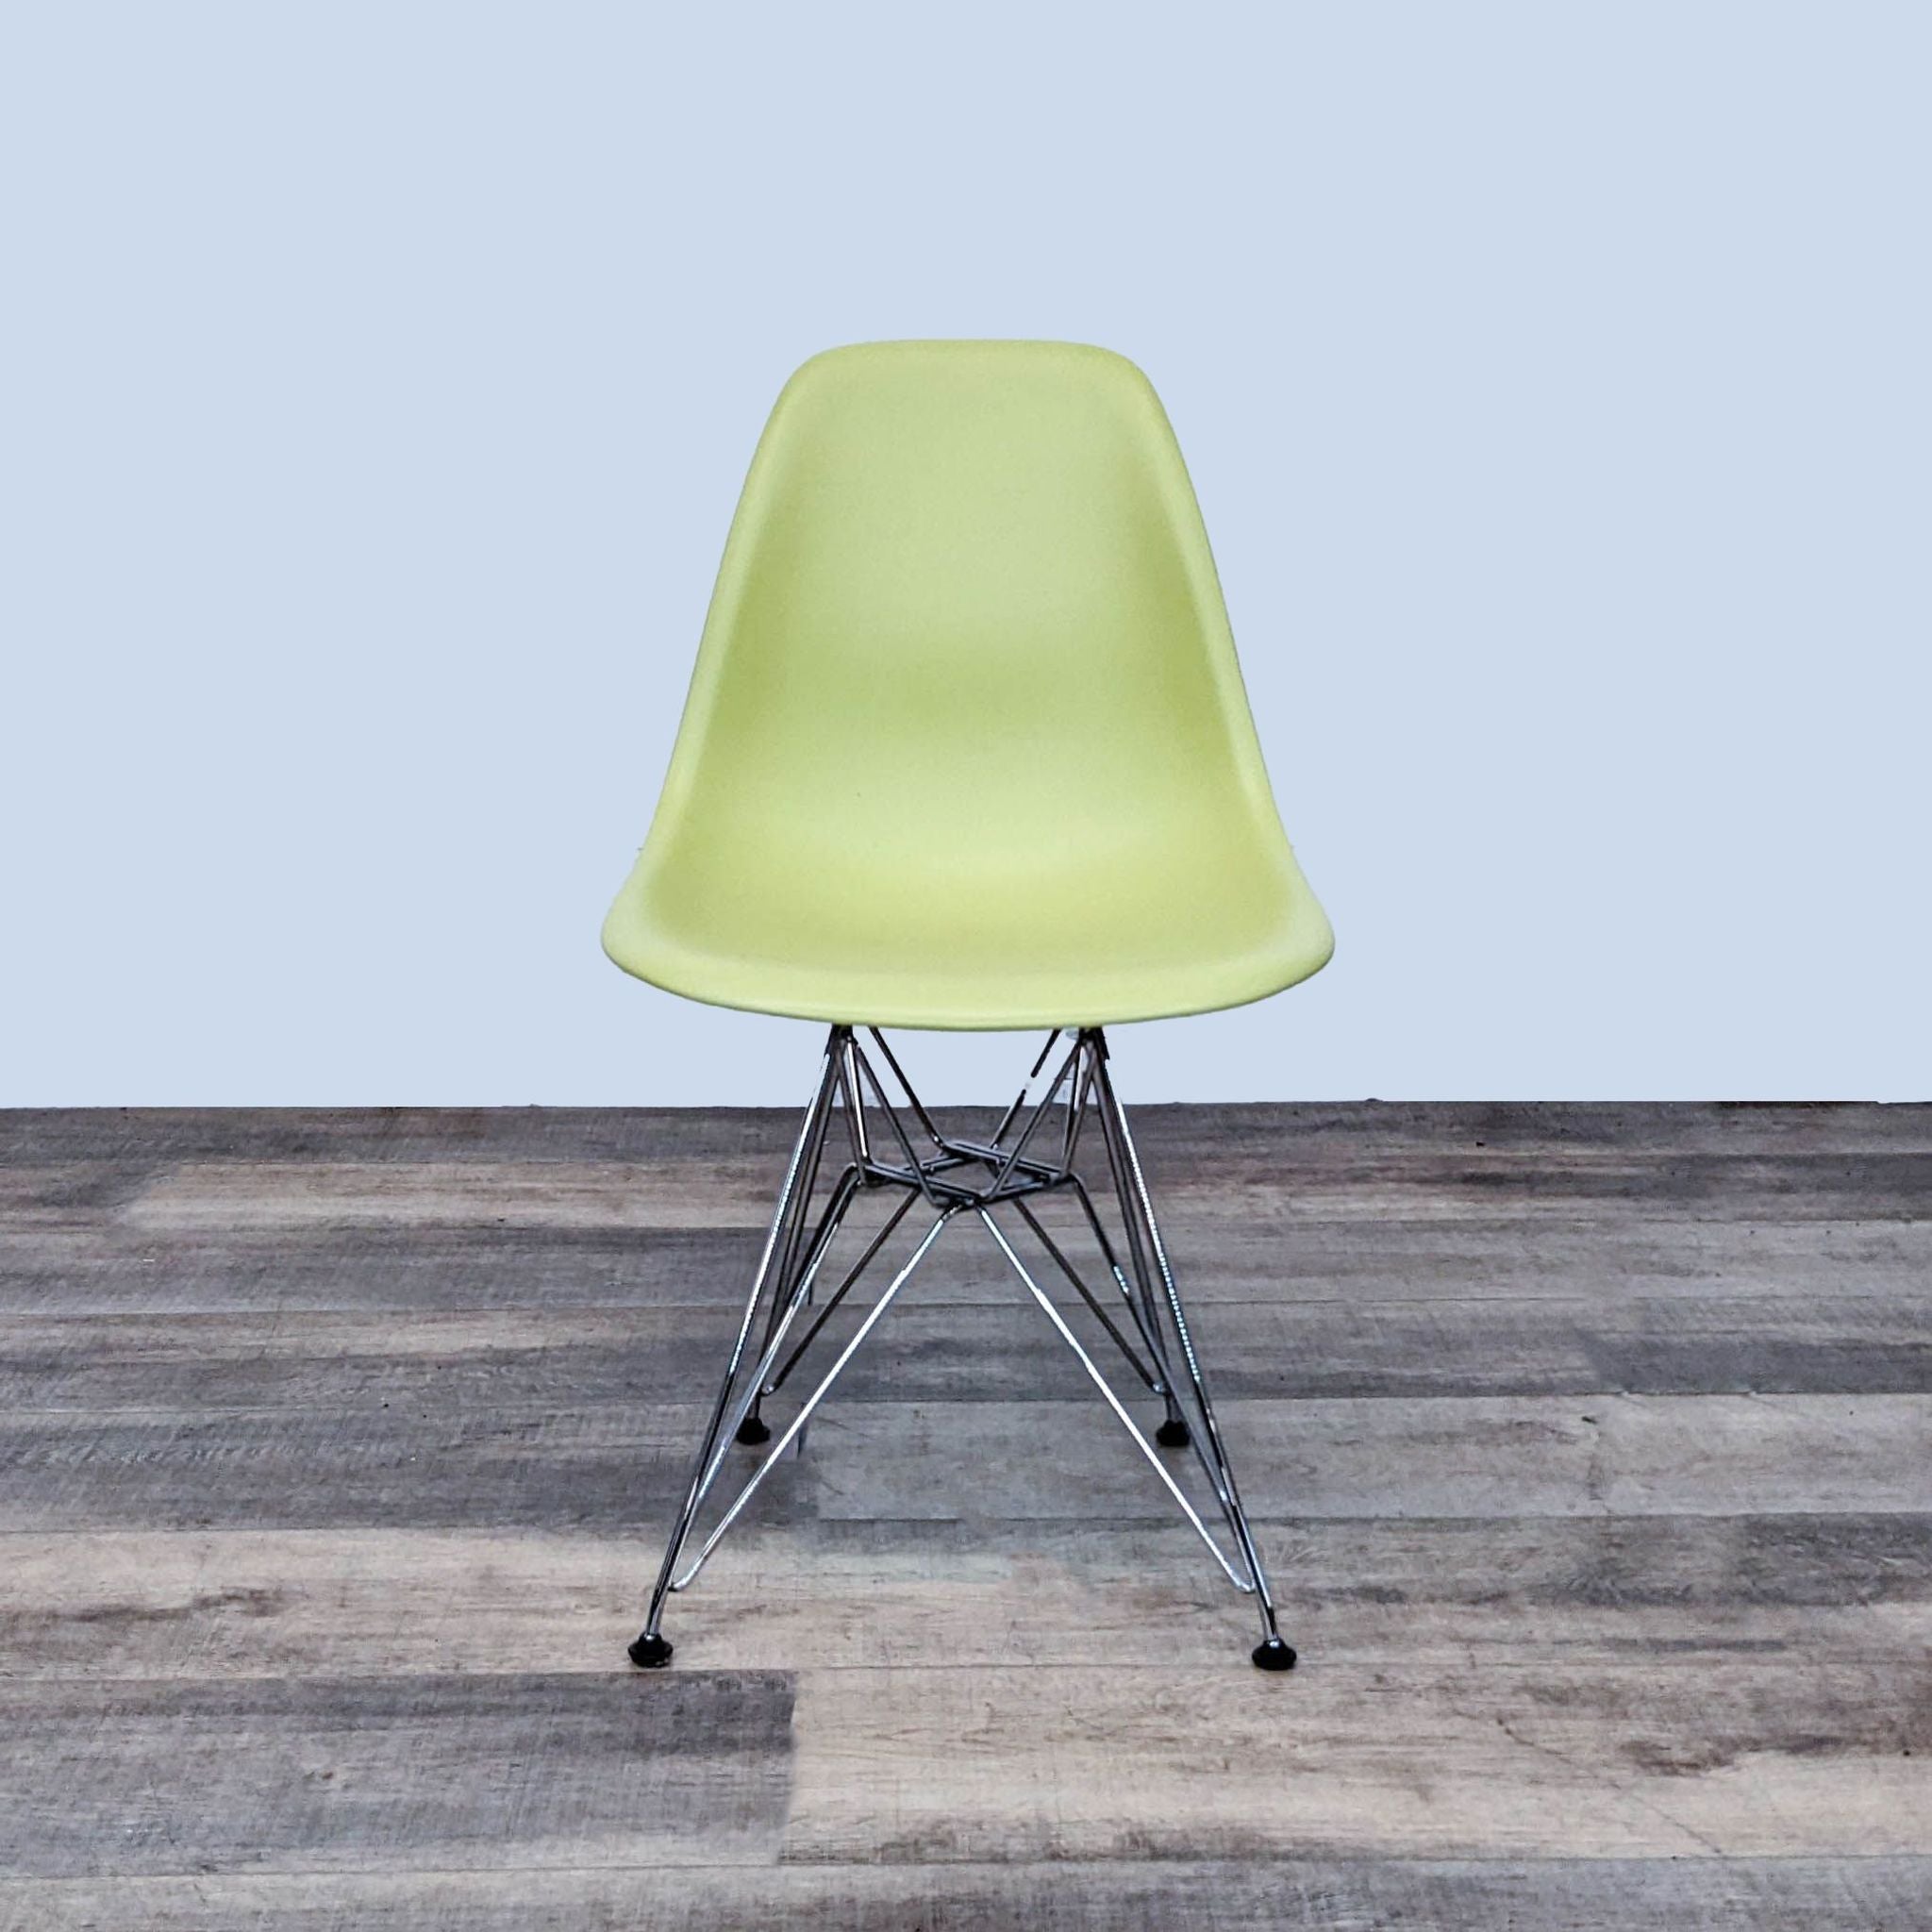 Alt text 1: A light green Vitra Eames dining chair with a molded plastic seat, chrome Eiffel-style base, on a wooden floor.